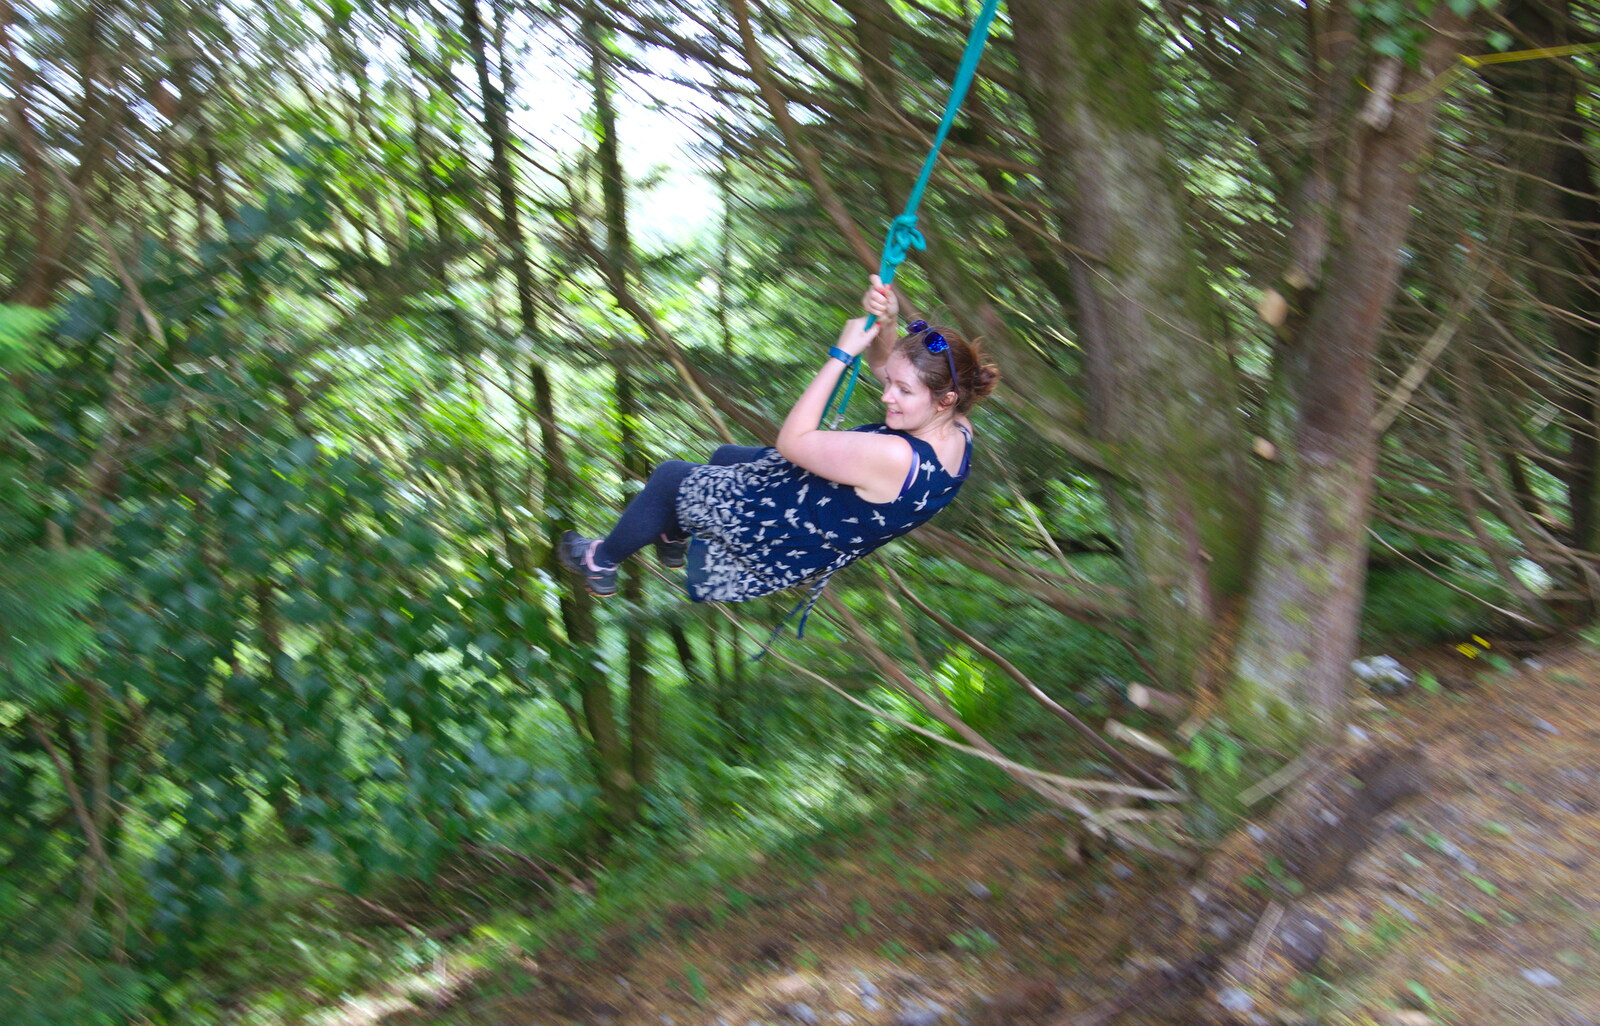 Isobel has a go on the rope swing from Glencar Waterfall and Parke's Castle, Kilmore, Leitrim, Ireland - 18th August 2019